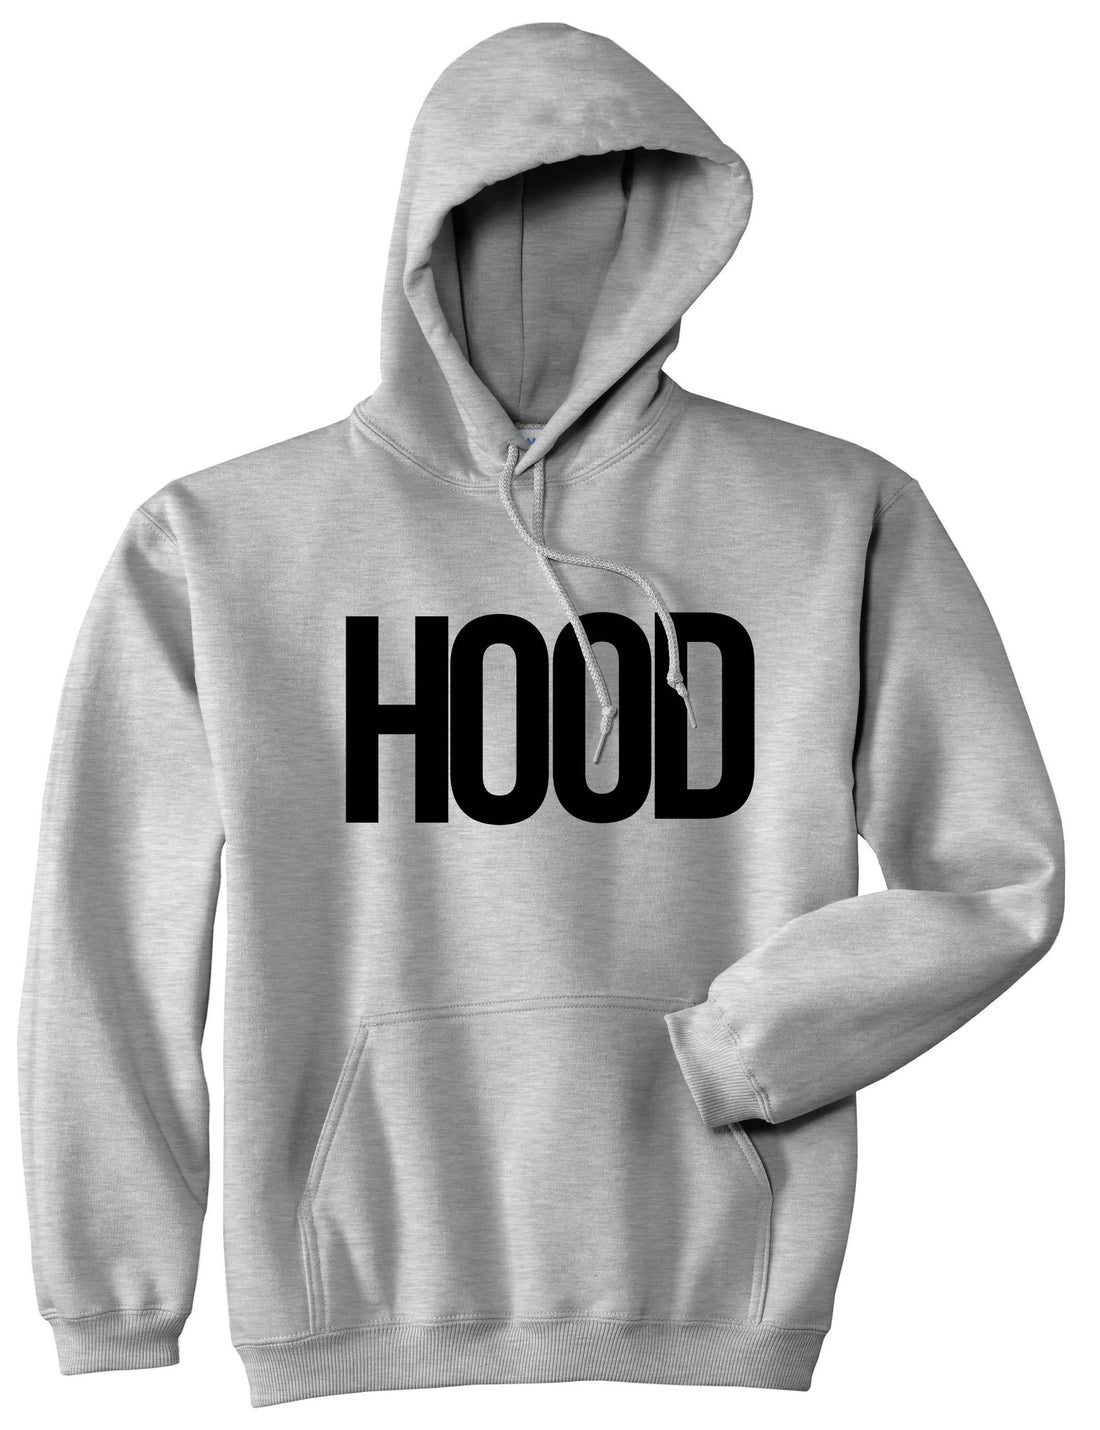 Hood Trap Style Compton New York Air Pullover Hoodie Hoody In Grey by Kings Of NY